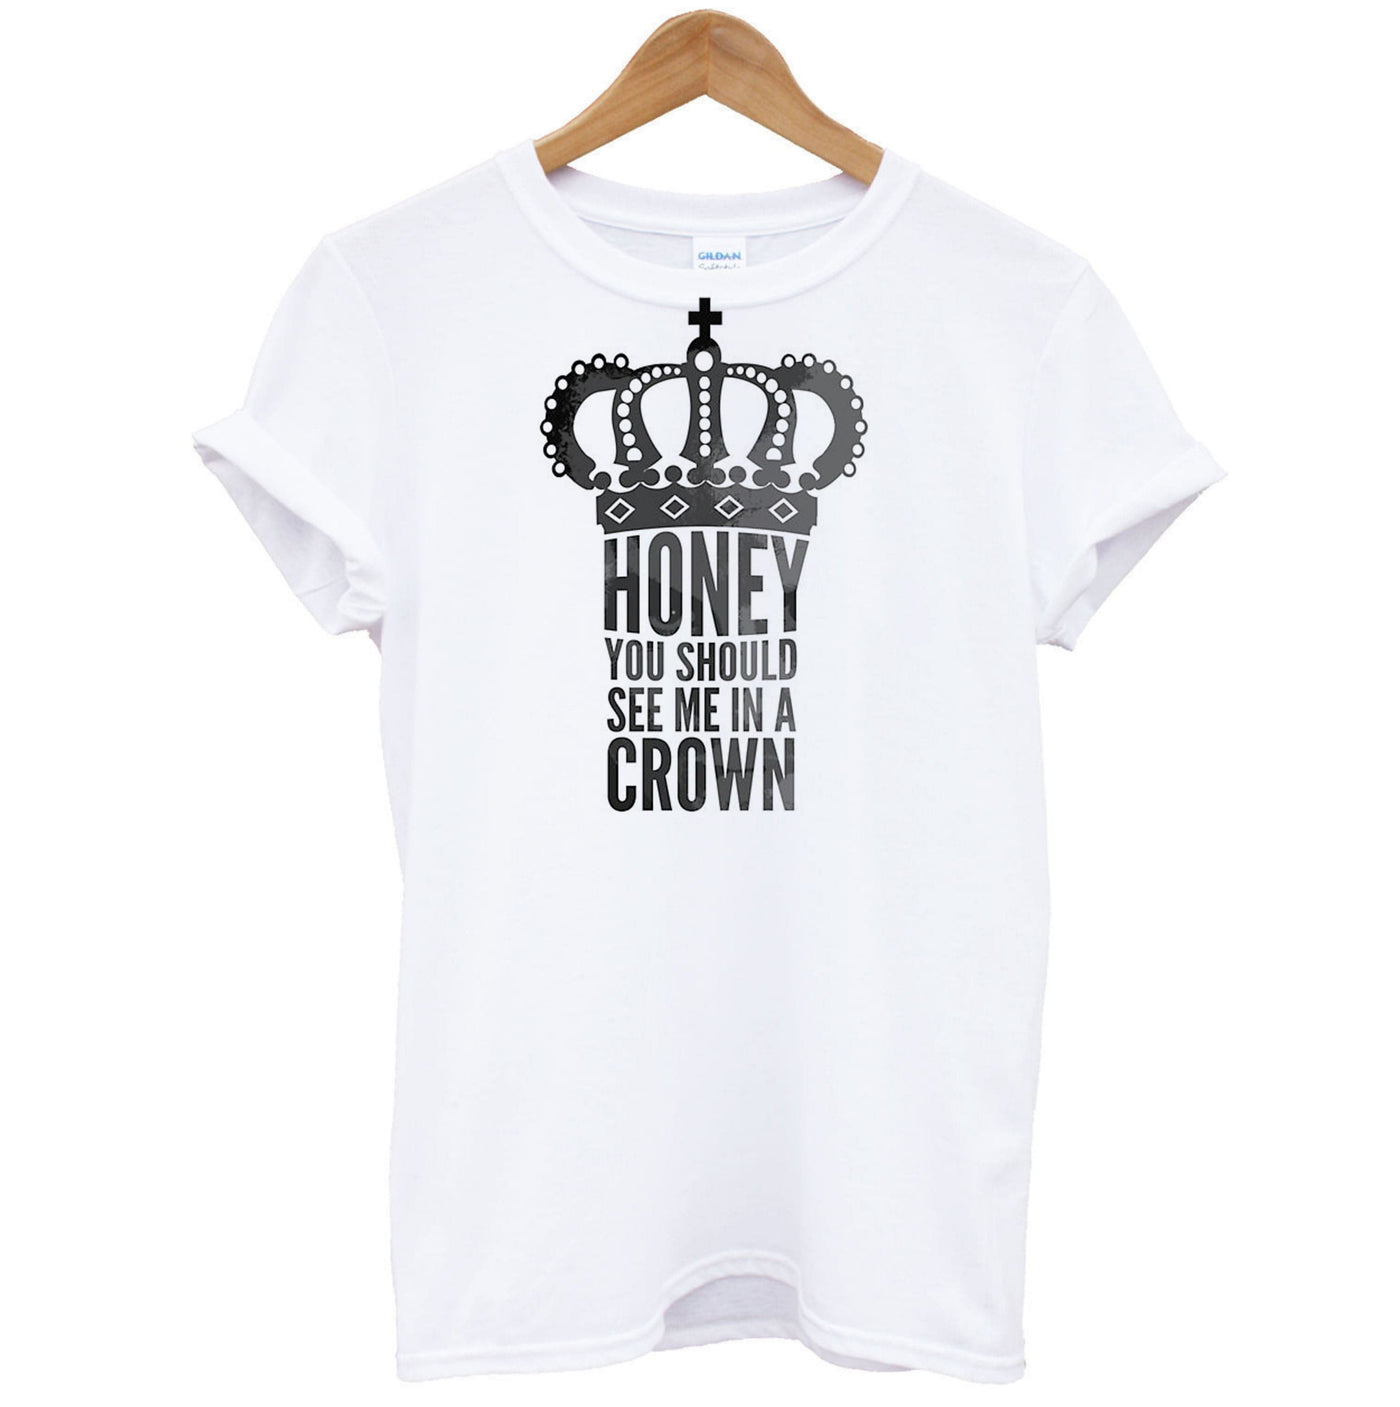 Honey You Should See Me In A Crown - Sherlock T-Shirt